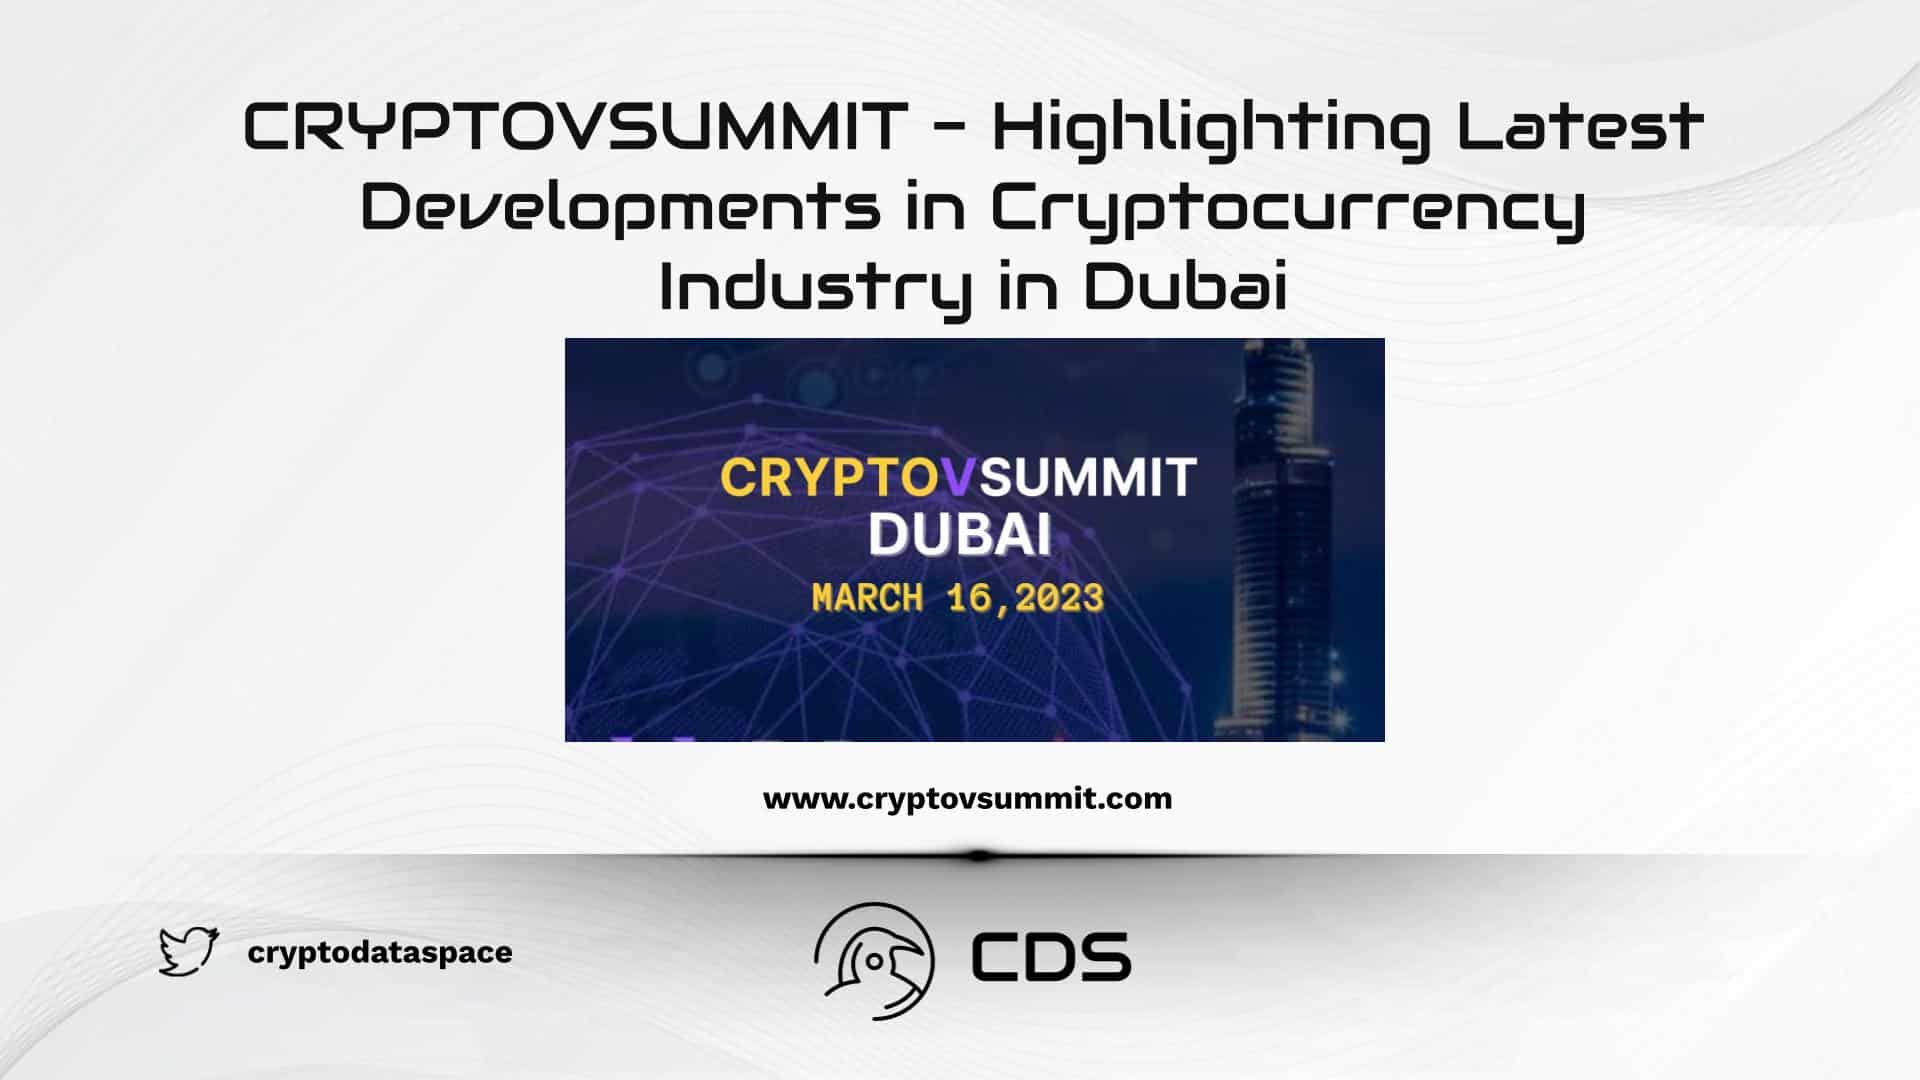 CRYPTOVSUMMIT - Highlighting Latest Developments in Cryptocurrency Industry in Dubai